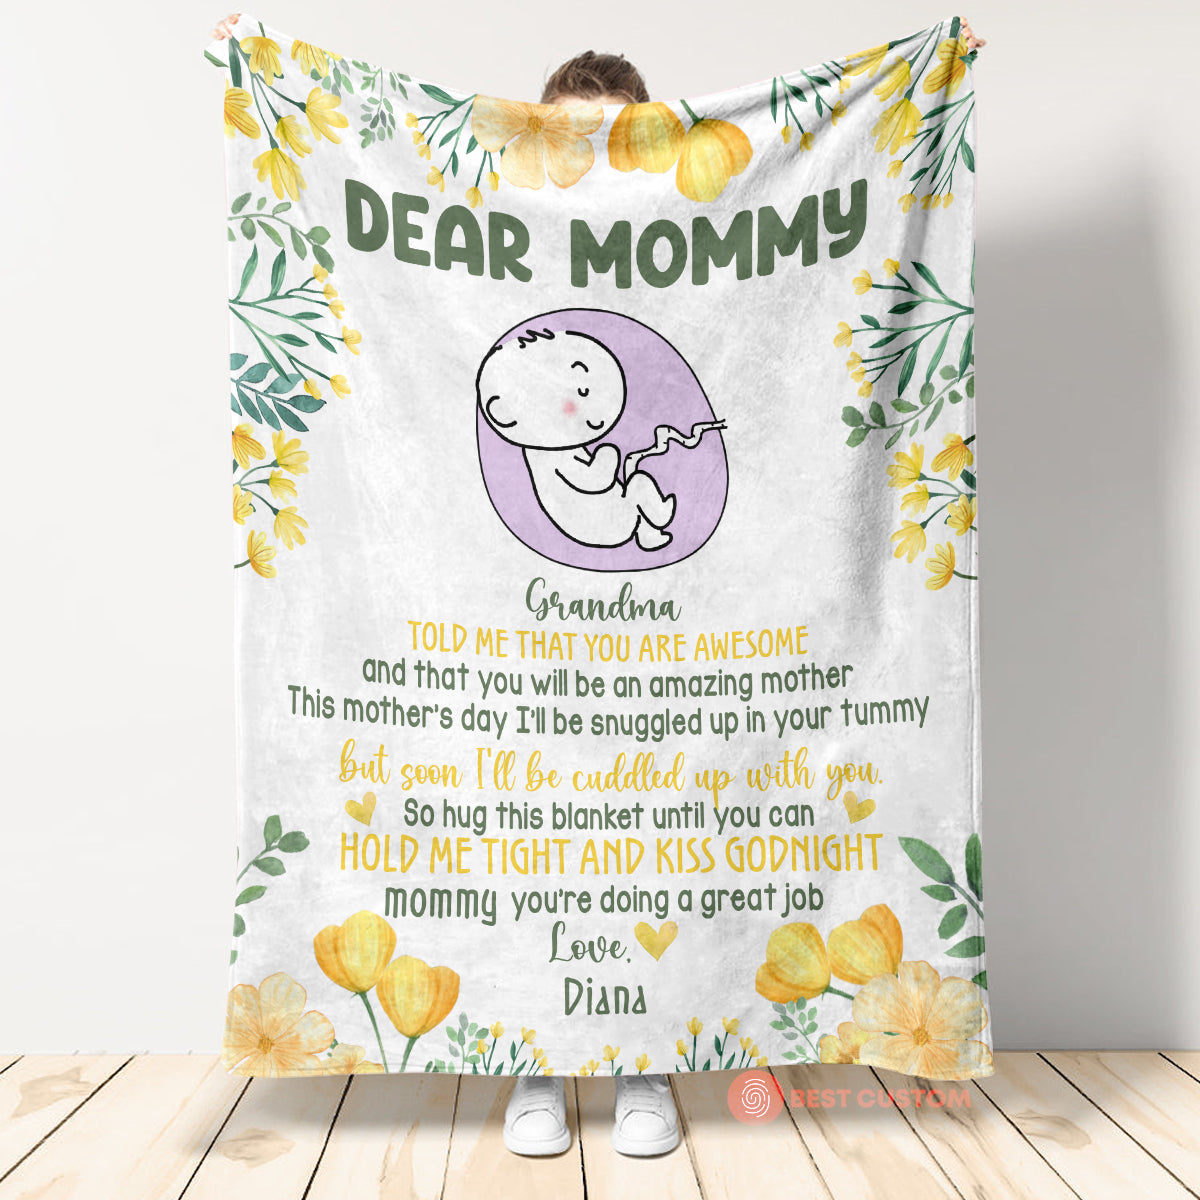 Soon I ll Be Cuddled Up With You - Personalized Blanket - Gift For Expecting Mom, Soon To Be Mom, Mother's Day SoonI_llBeCuddledUpWithYou-7.jpg?v=1681206639